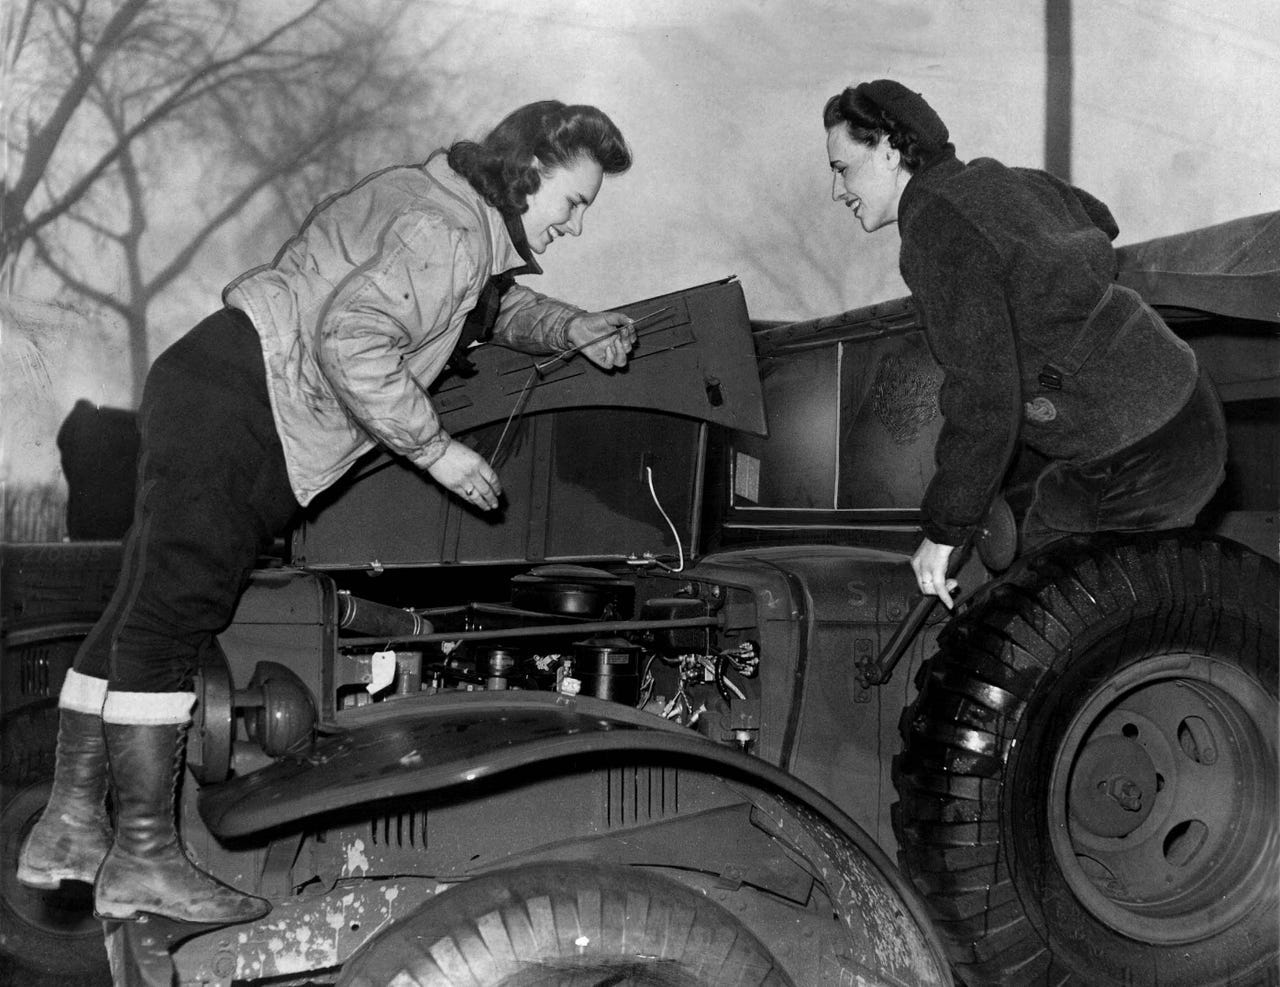 Ruth Markovich and Anna Plagens were drivers for the U.S. Army in November 1942. The women checked the oil on their Jeep and did their own minor repairs while on convoy.